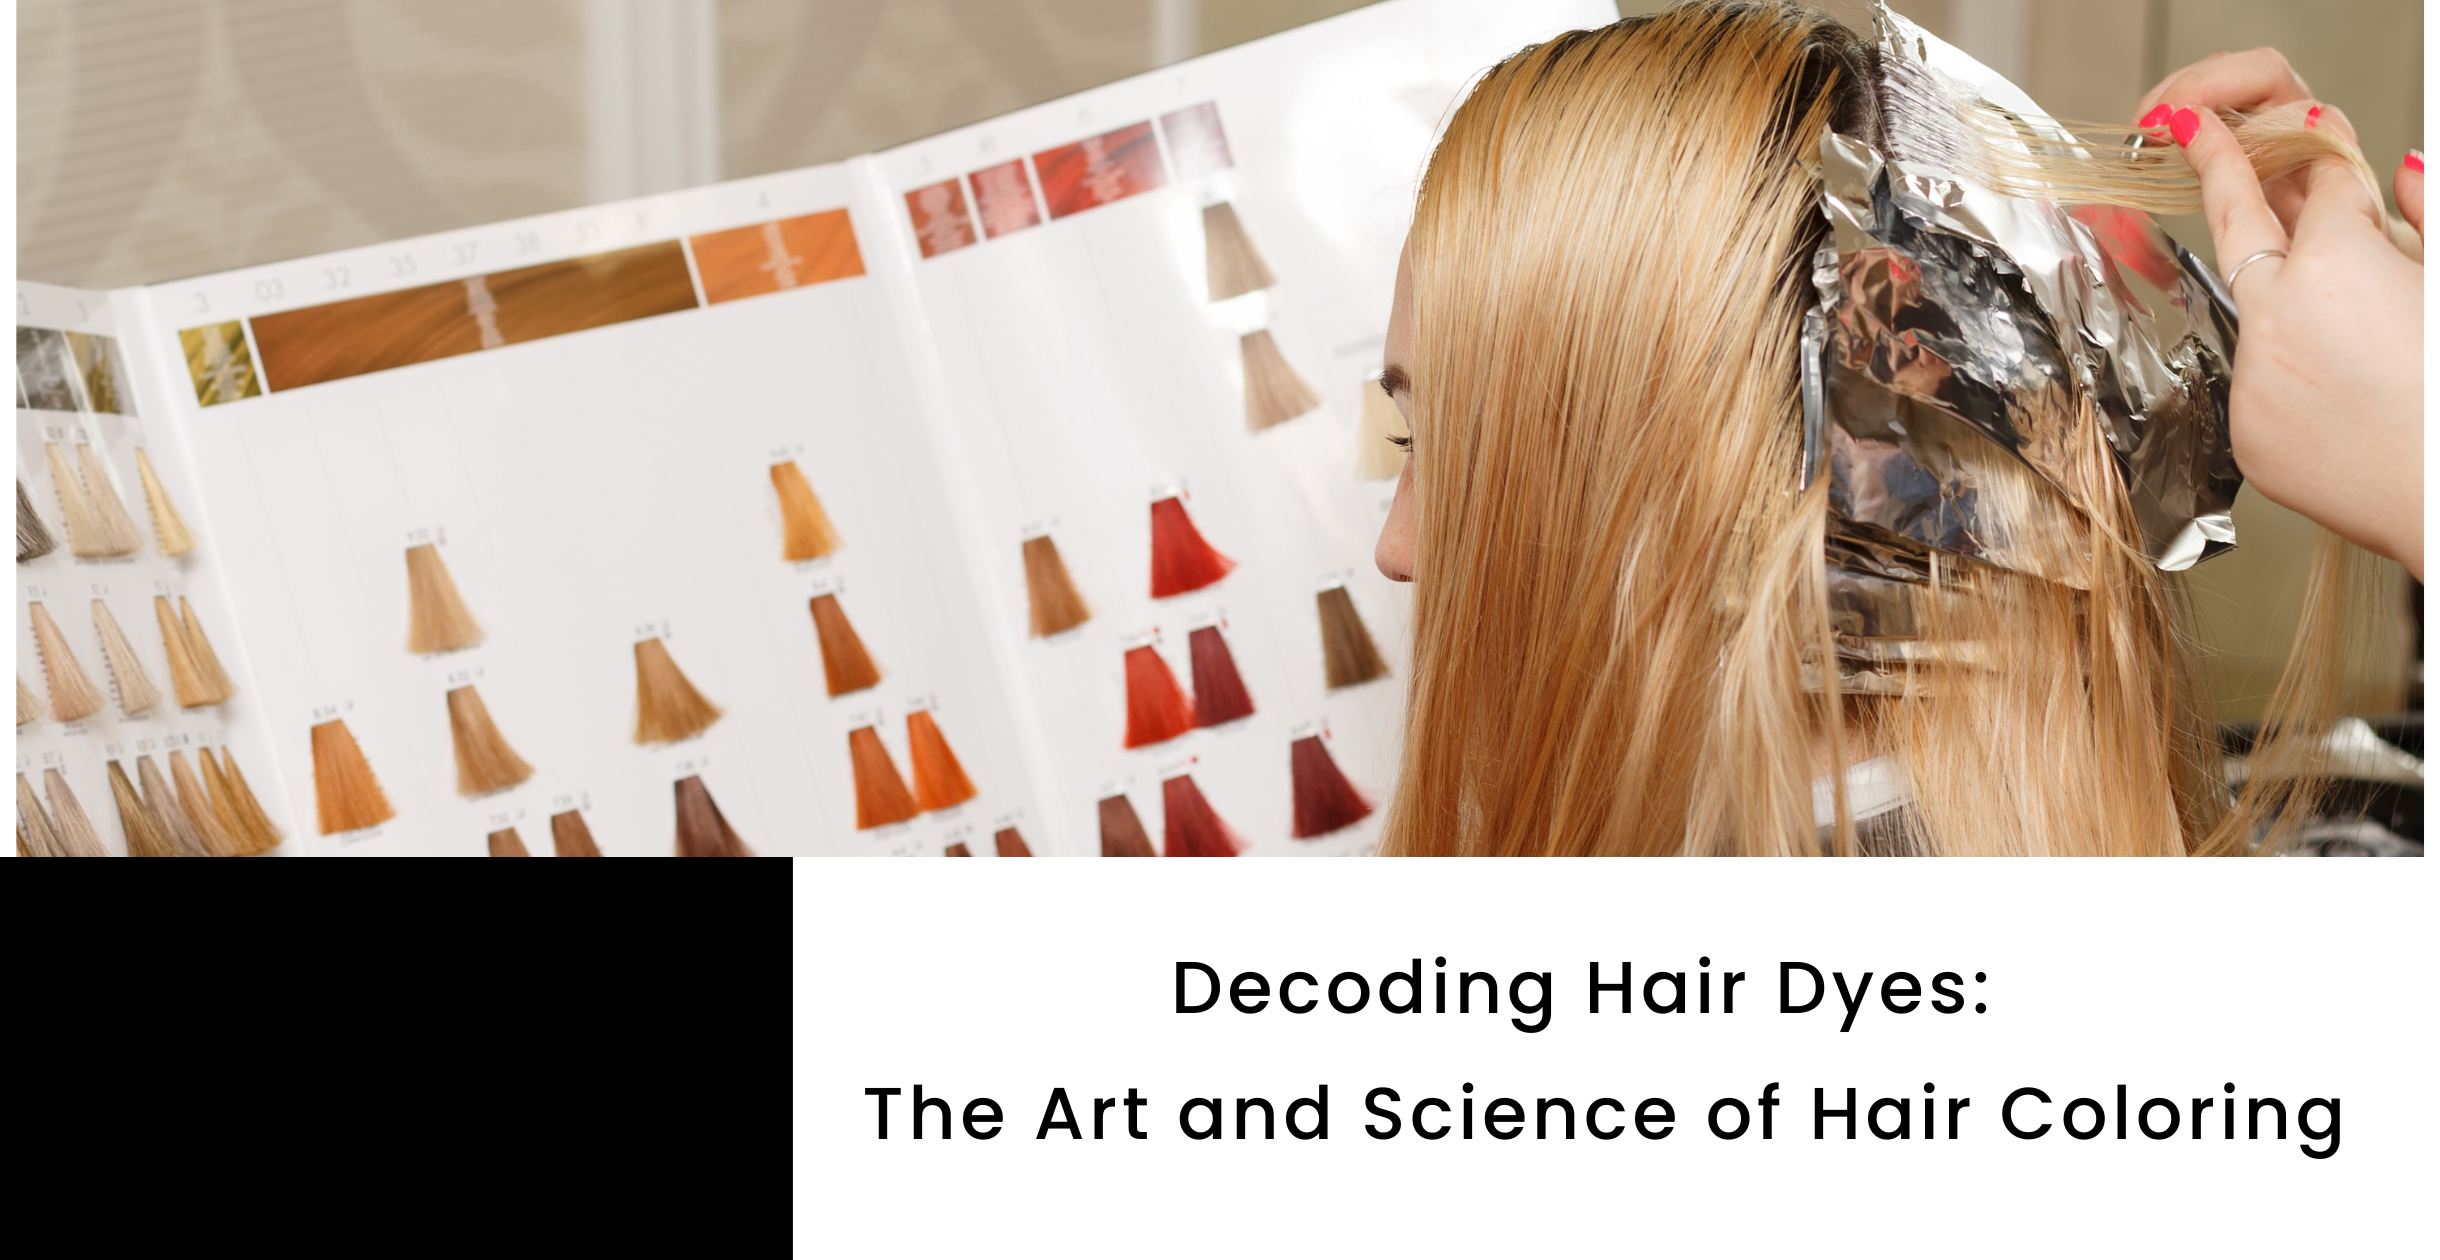 Decoding Hair Dyes: The Art and Science of Hair Coloring